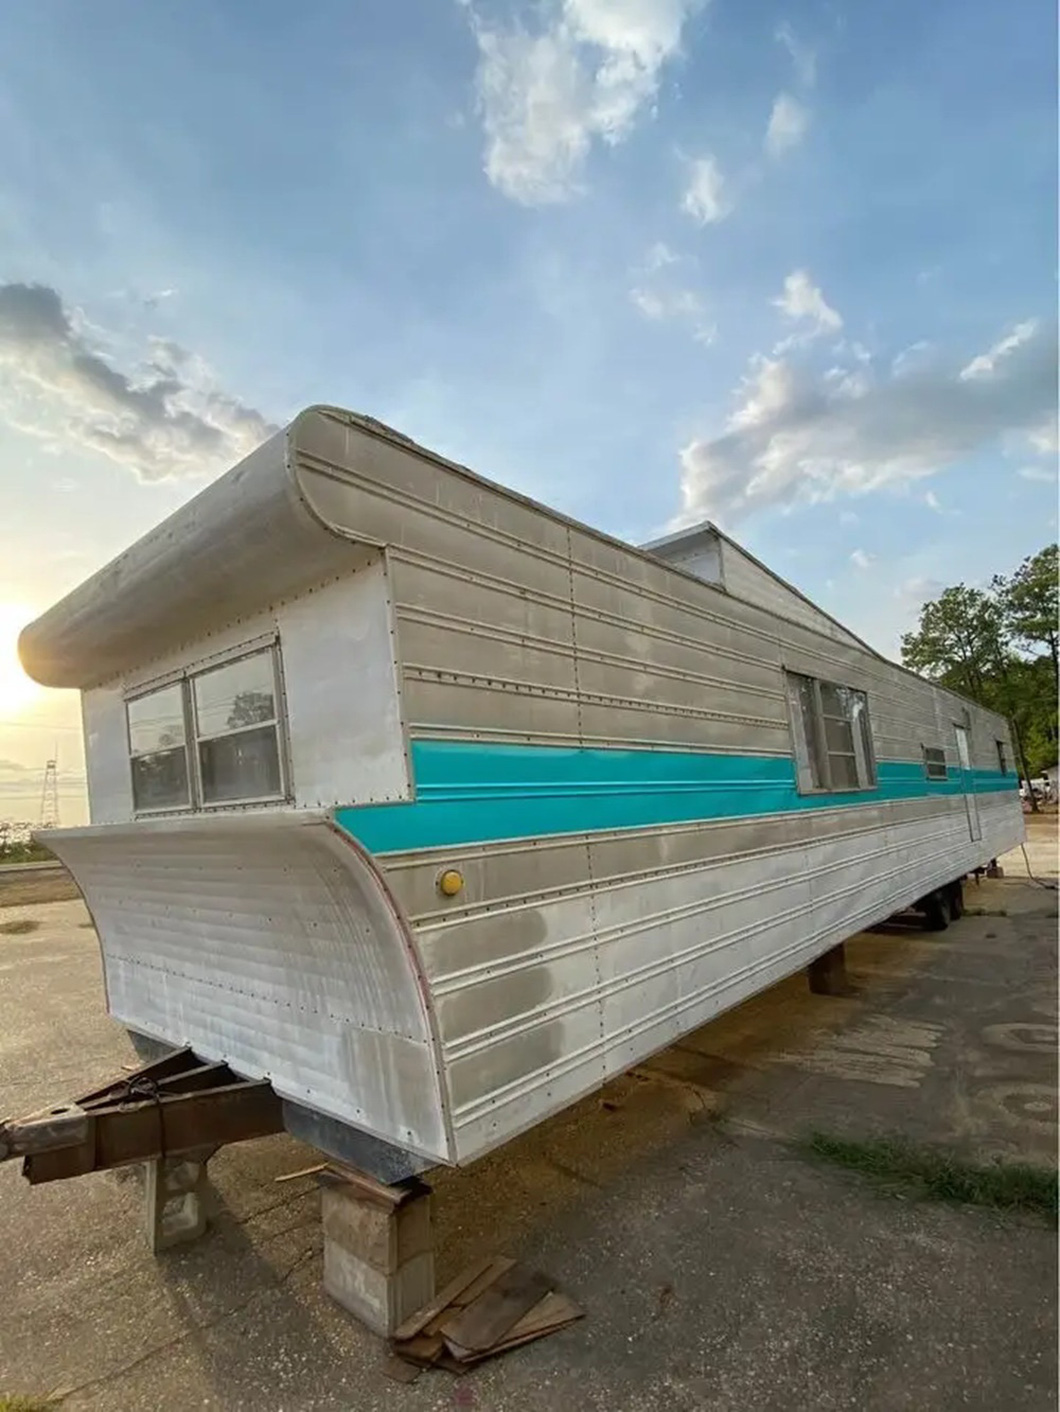 The house really impressed netizens, especially since it was a large mobile home in good condition, worth about US$24,500, even though it was a bit old - Photo: Home Obsession/Facebook